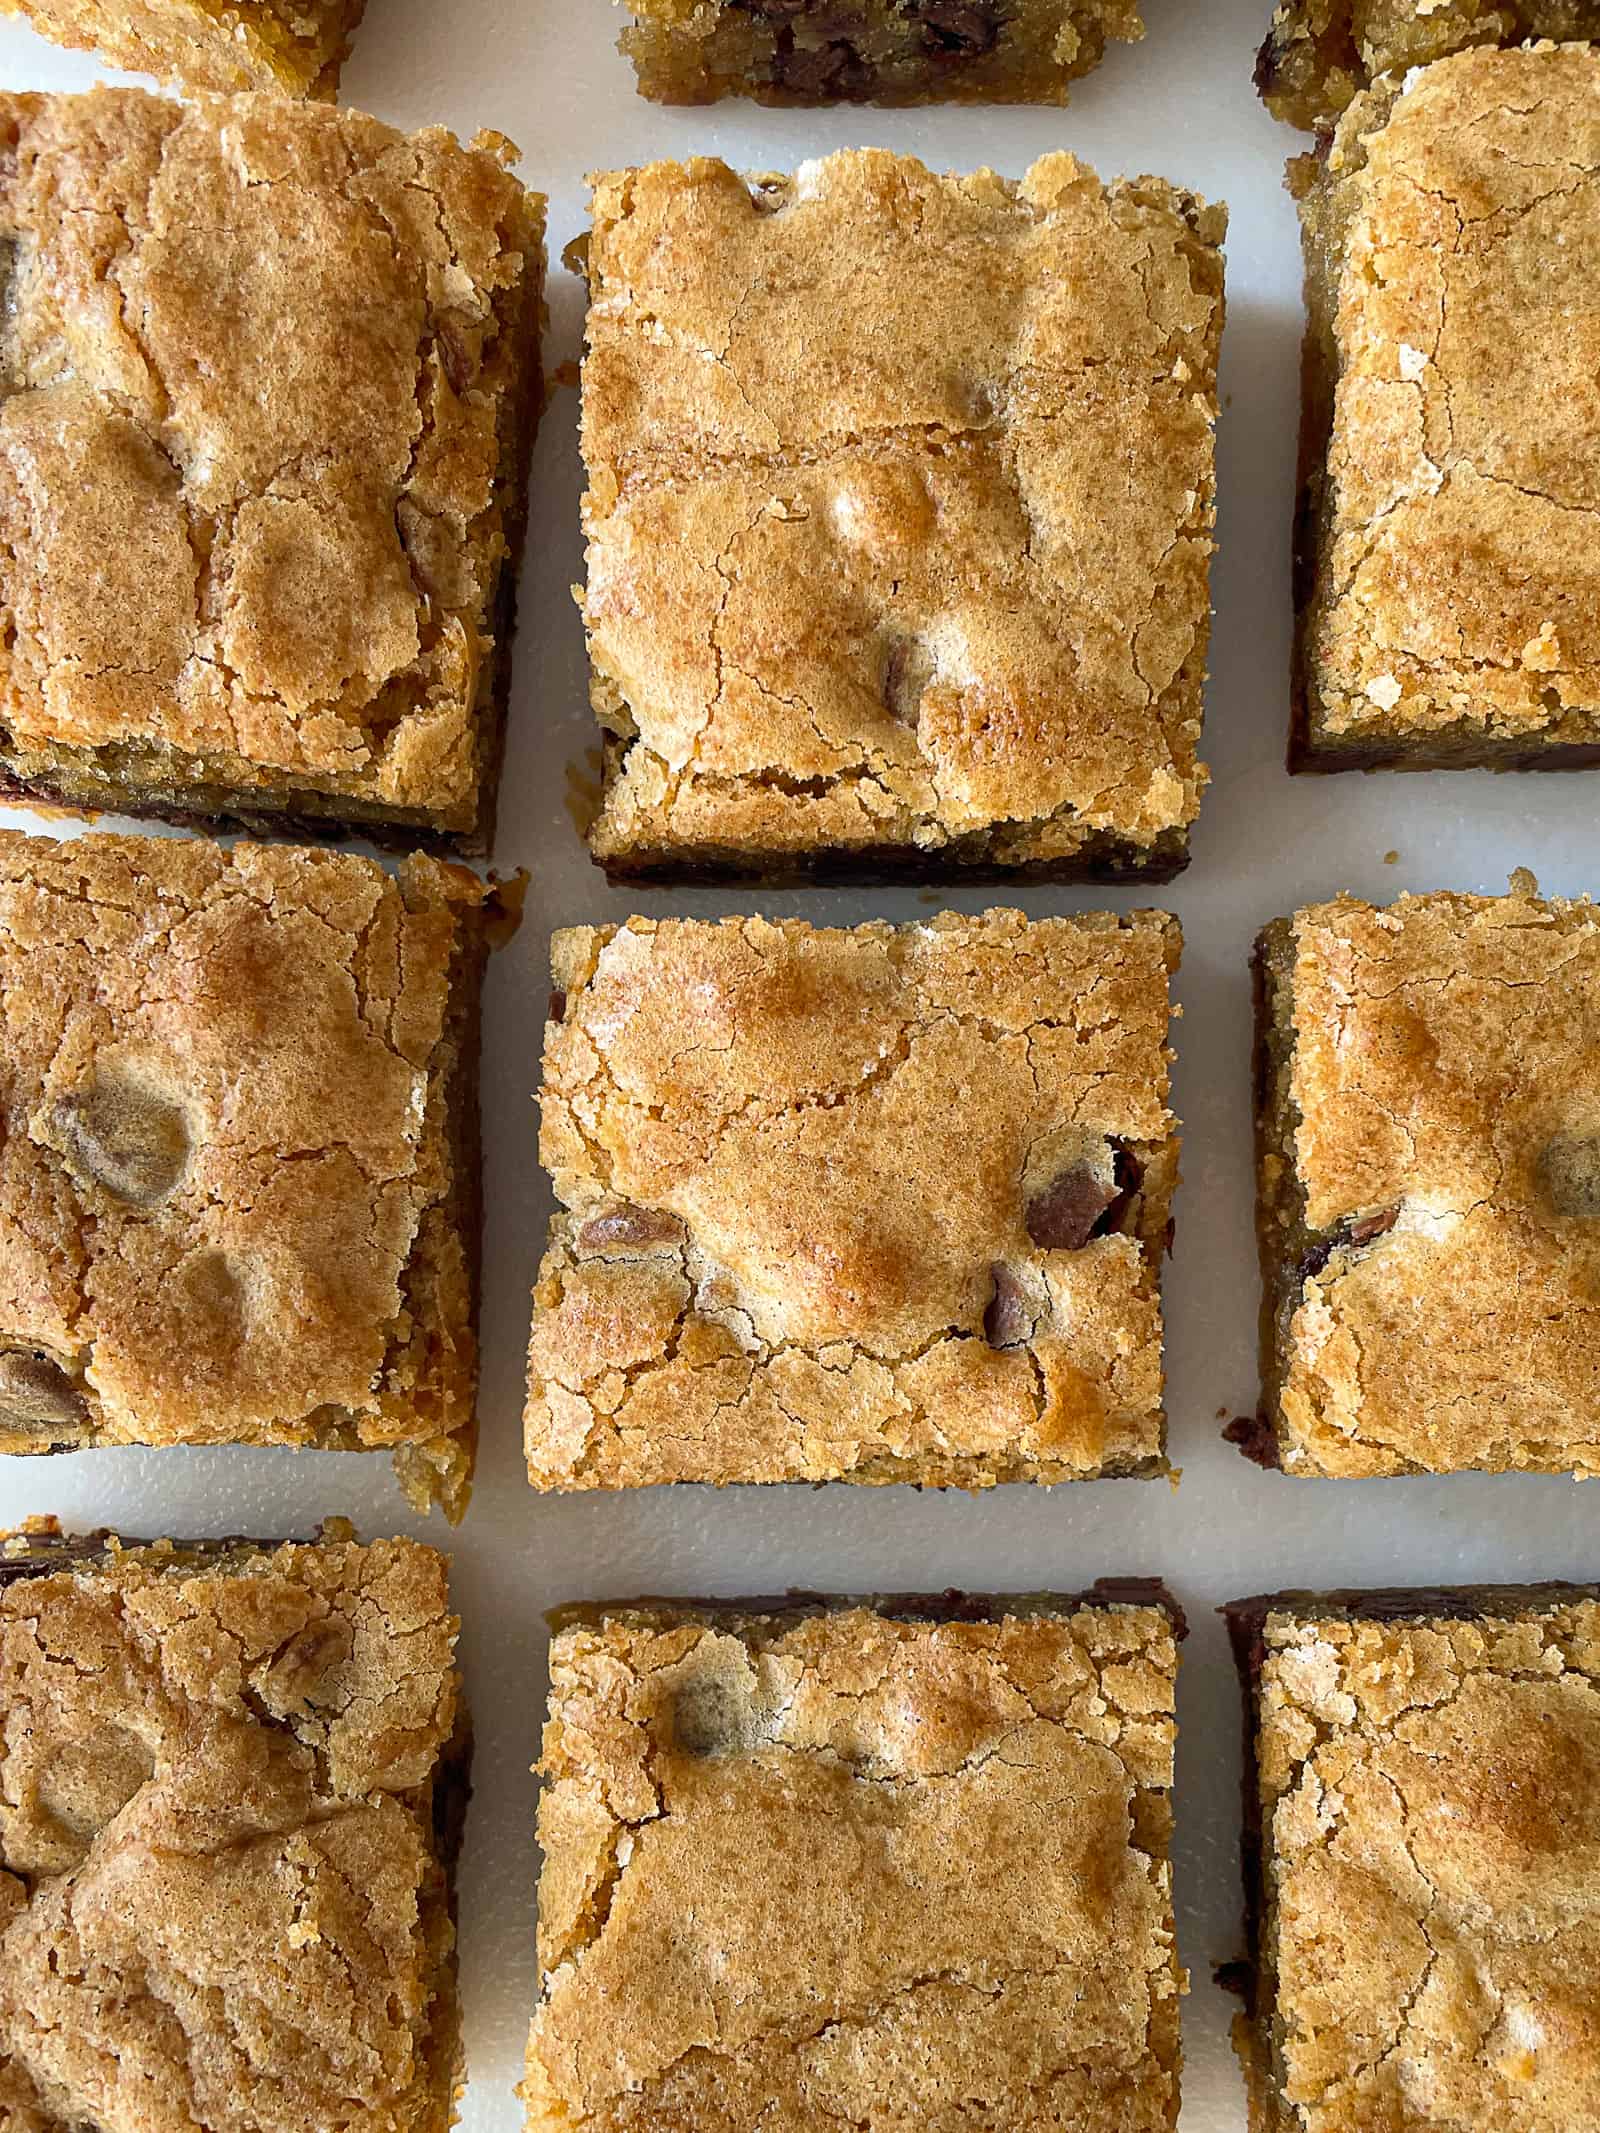 Gluten-free blondies cut into squares on a cutting board.